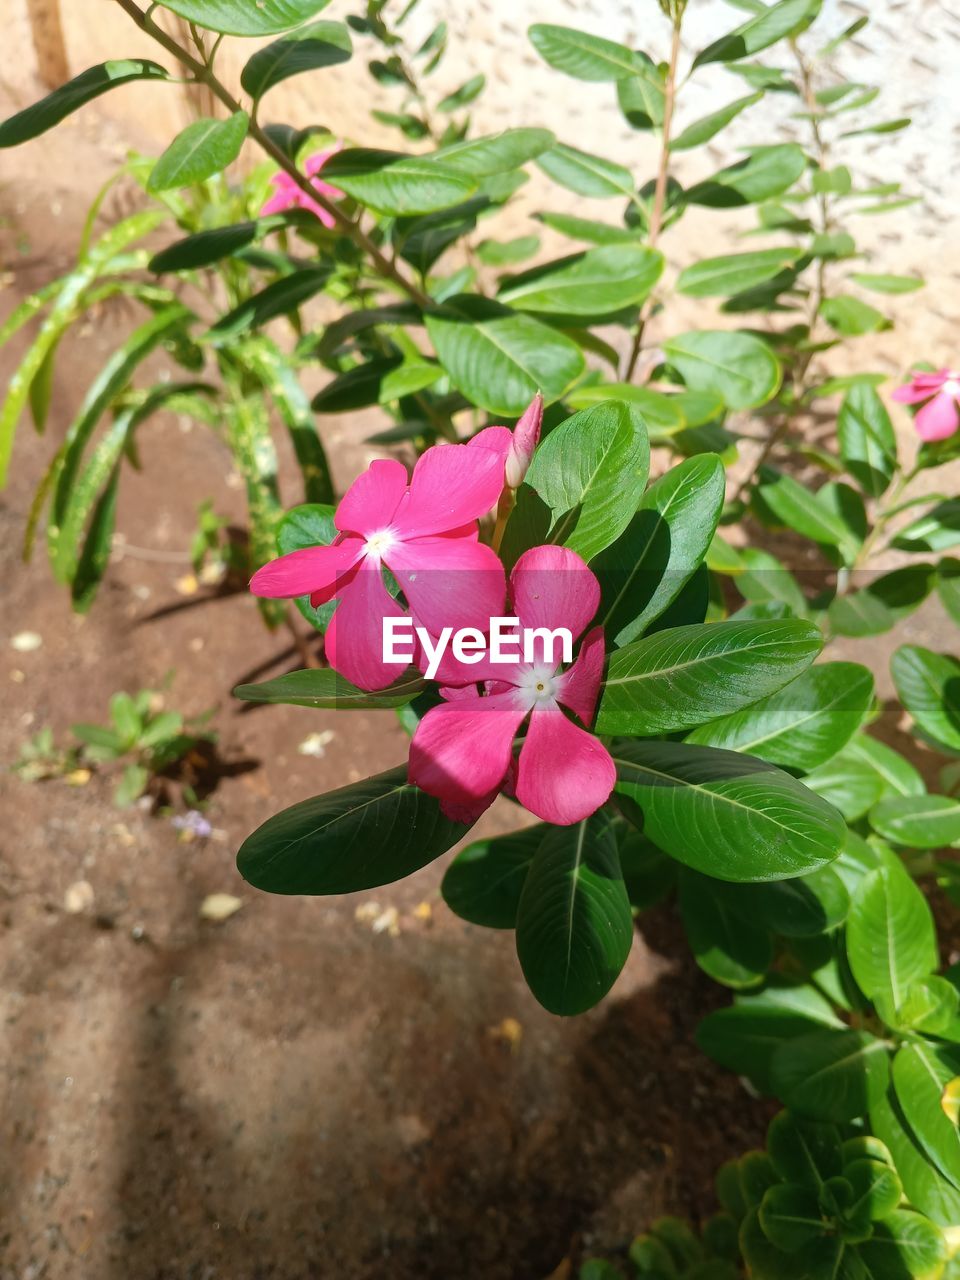 plant, flower, flowering plant, leaf, plant part, pink, beauty in nature, growth, nature, freshness, petal, fragility, close-up, no people, flower head, green, inflorescence, outdoors, day, garden, shrub, botany, springtime, rose, blossom